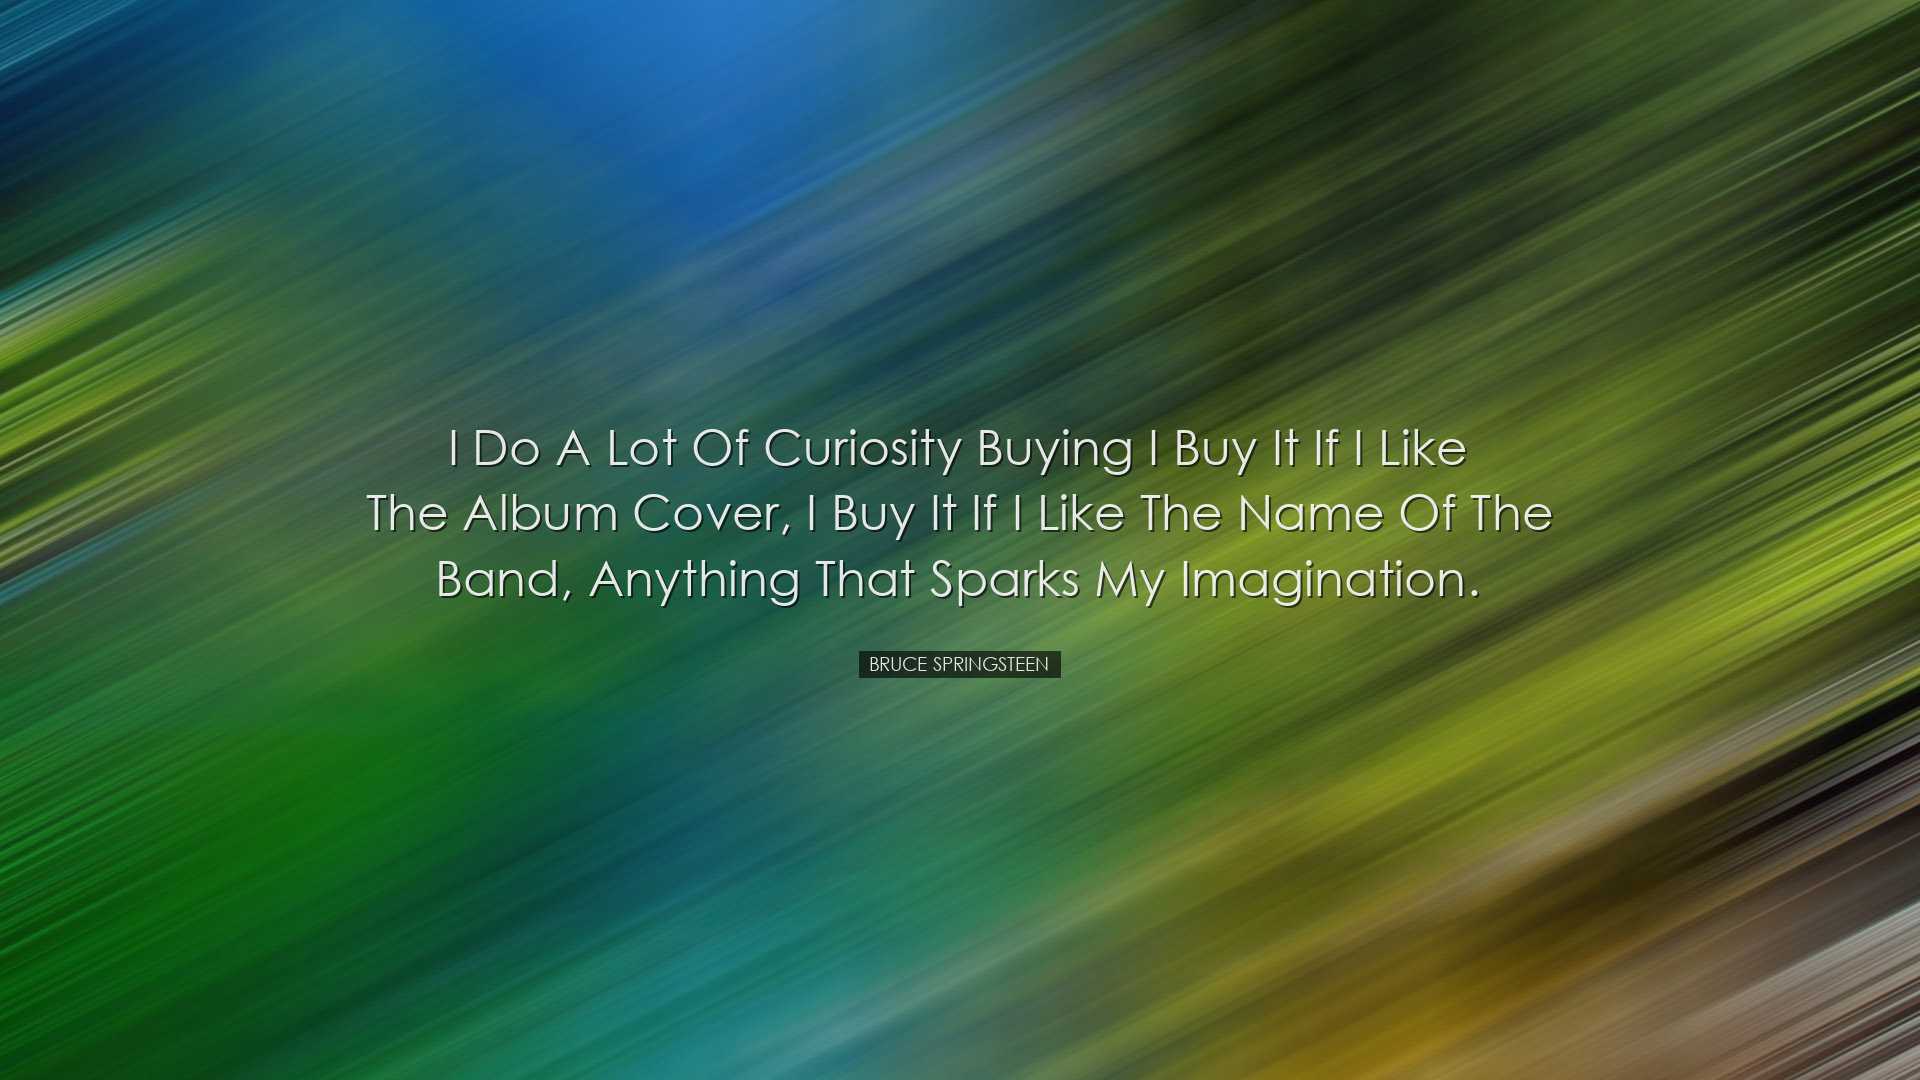 I do a lot of curiosity buying I buy it if I like the album cover,